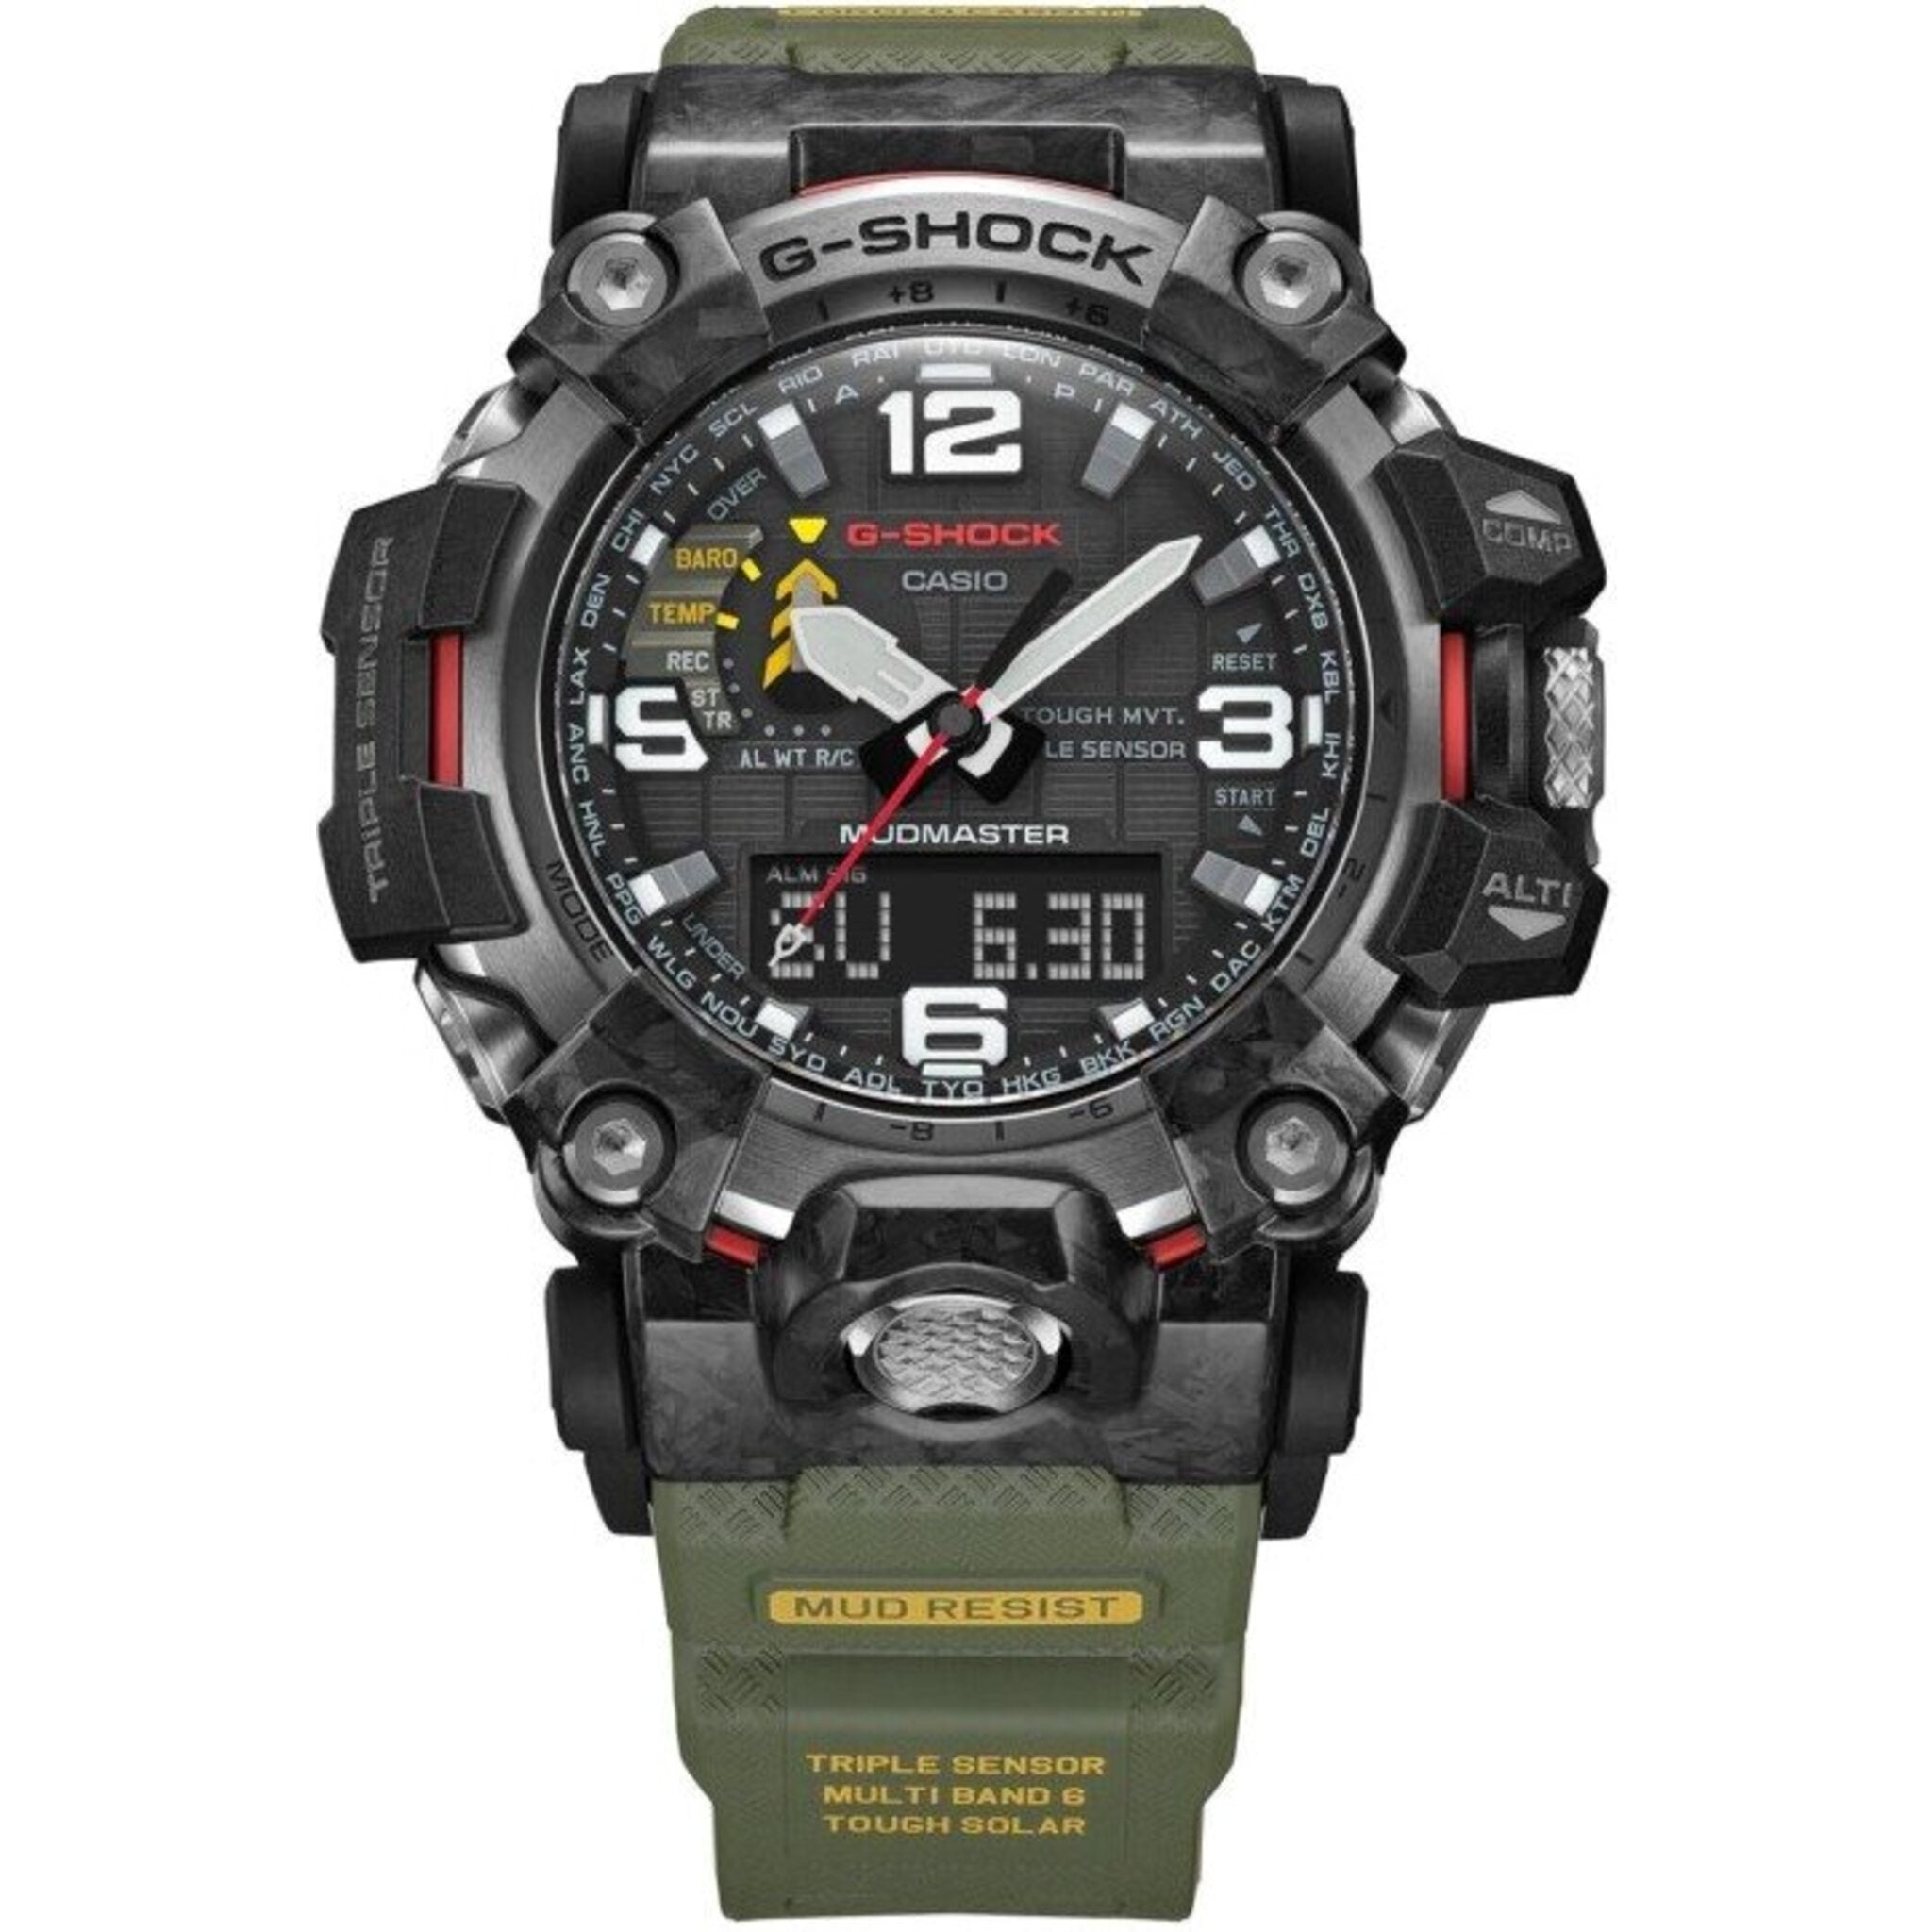 New G-SHOCK Mudmaster aims to be the toughest watch ever made - The Manual